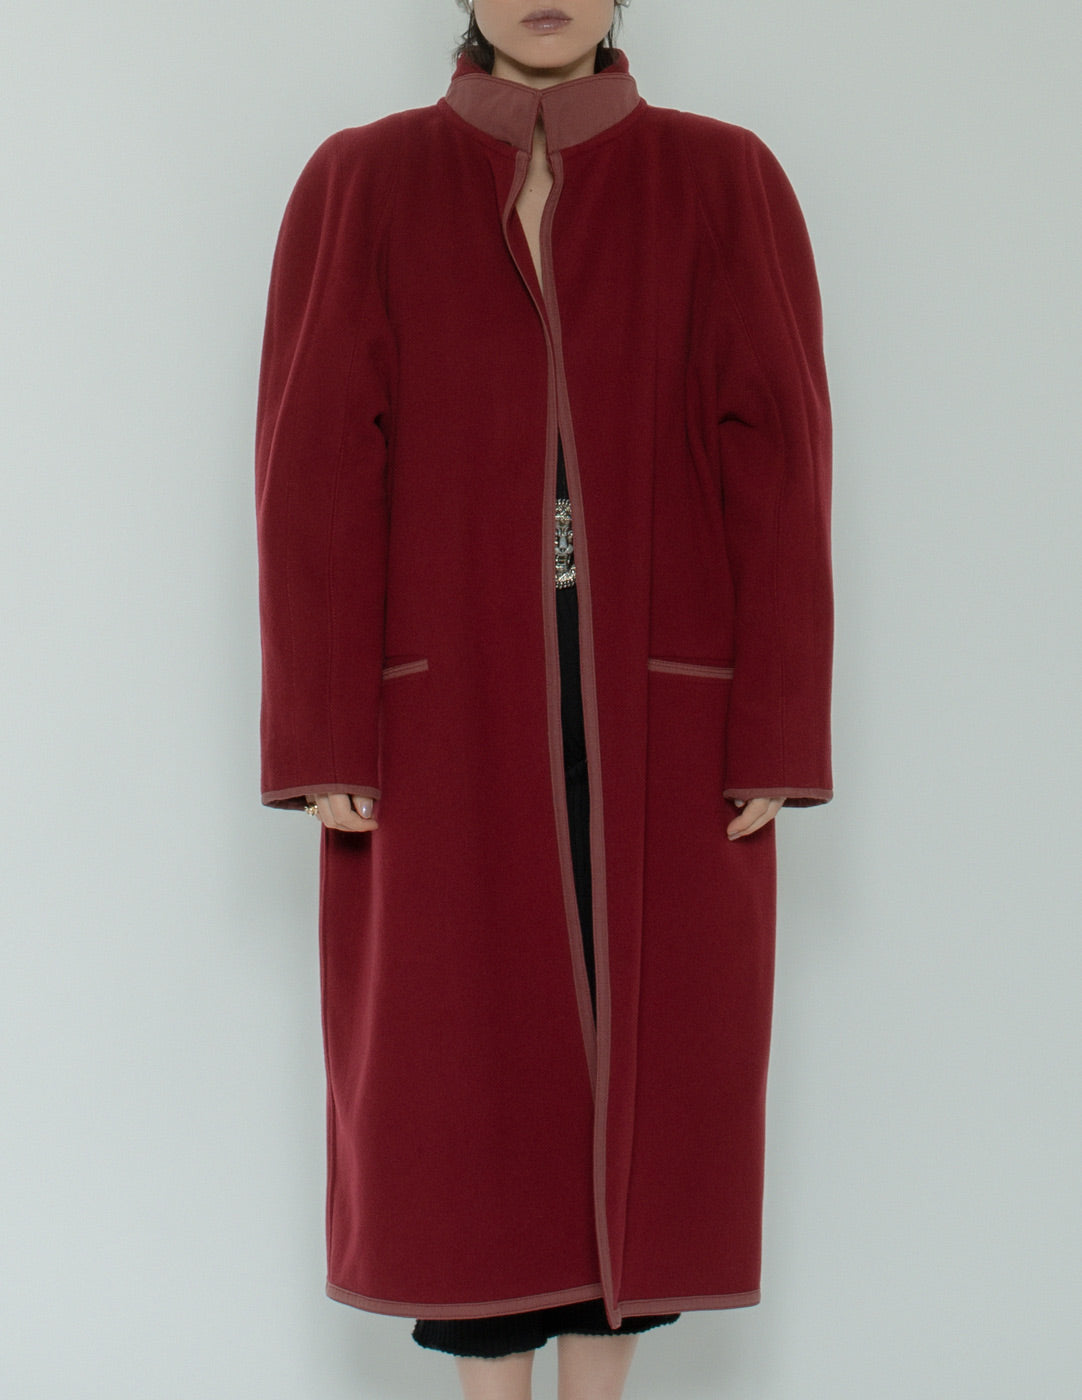 Gianni Versace vintage maroon wool and cashmere coat detail